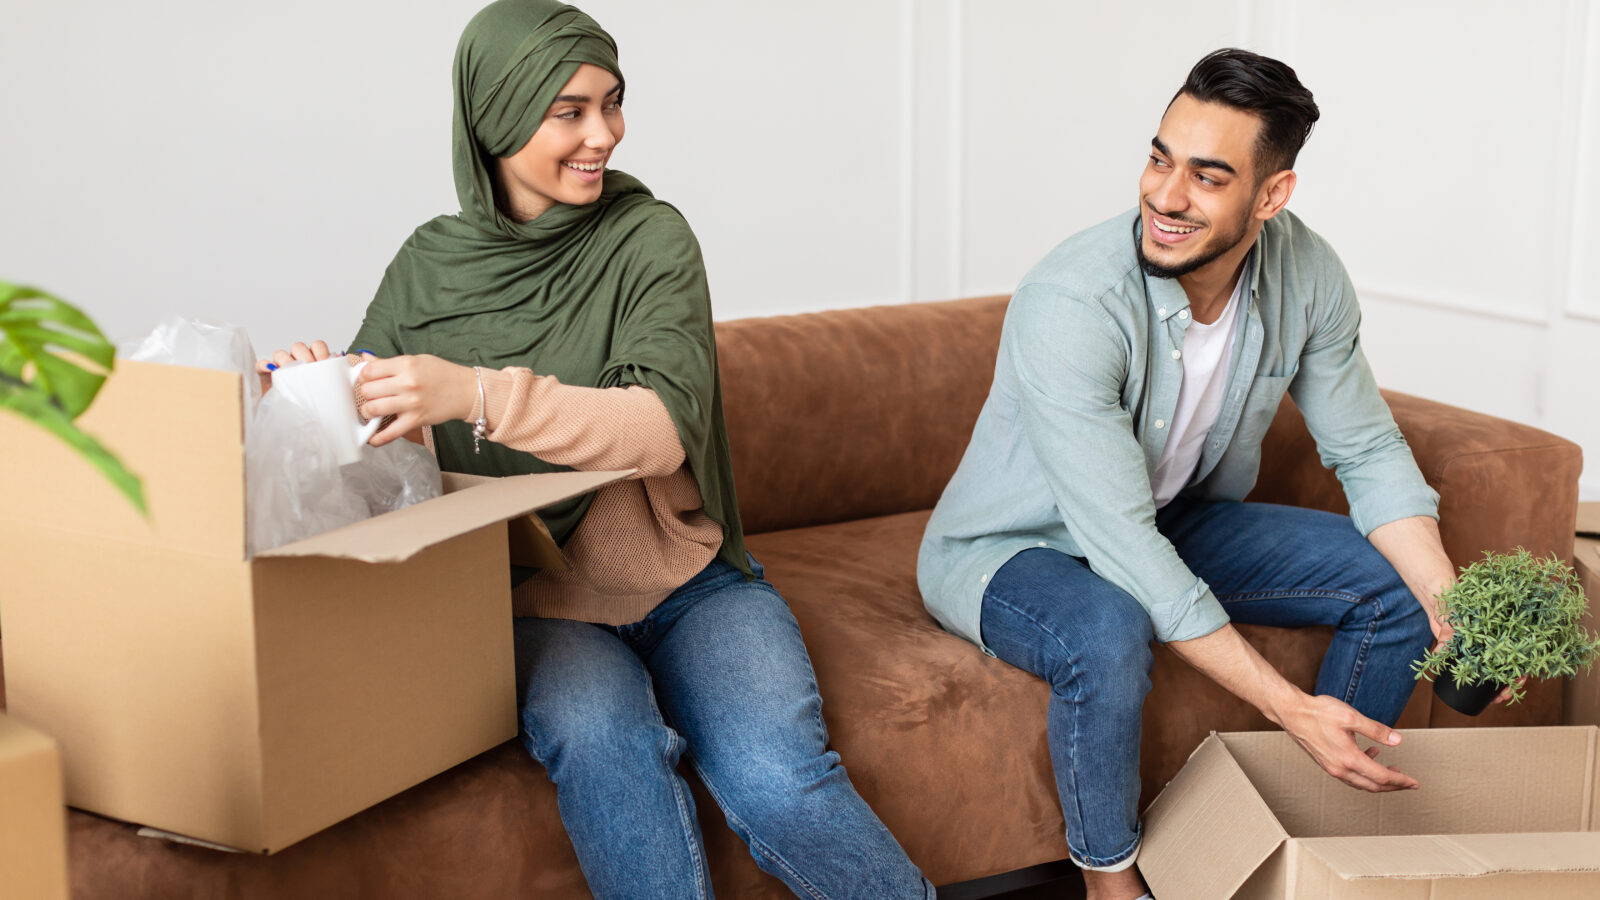 Our Halal Mortgage – No Waitlist!